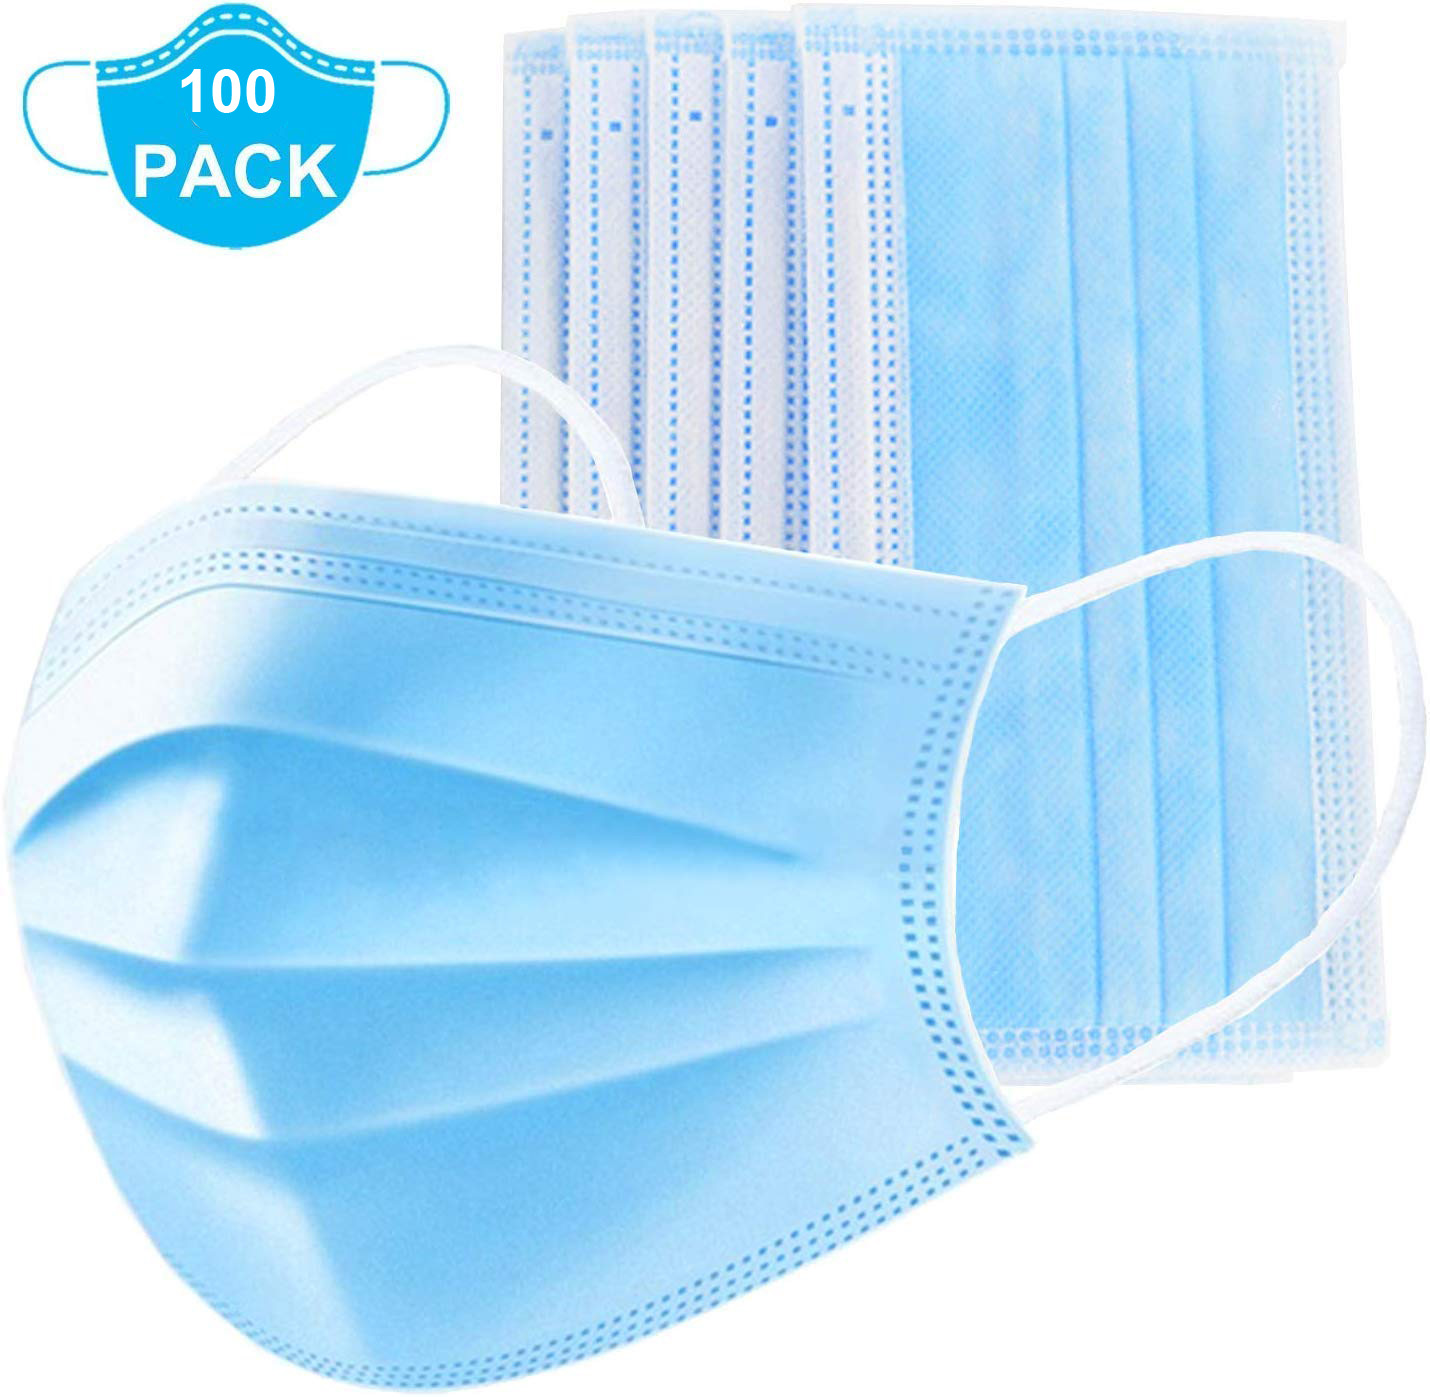 100 Pack of 3 Ply Disposable F...